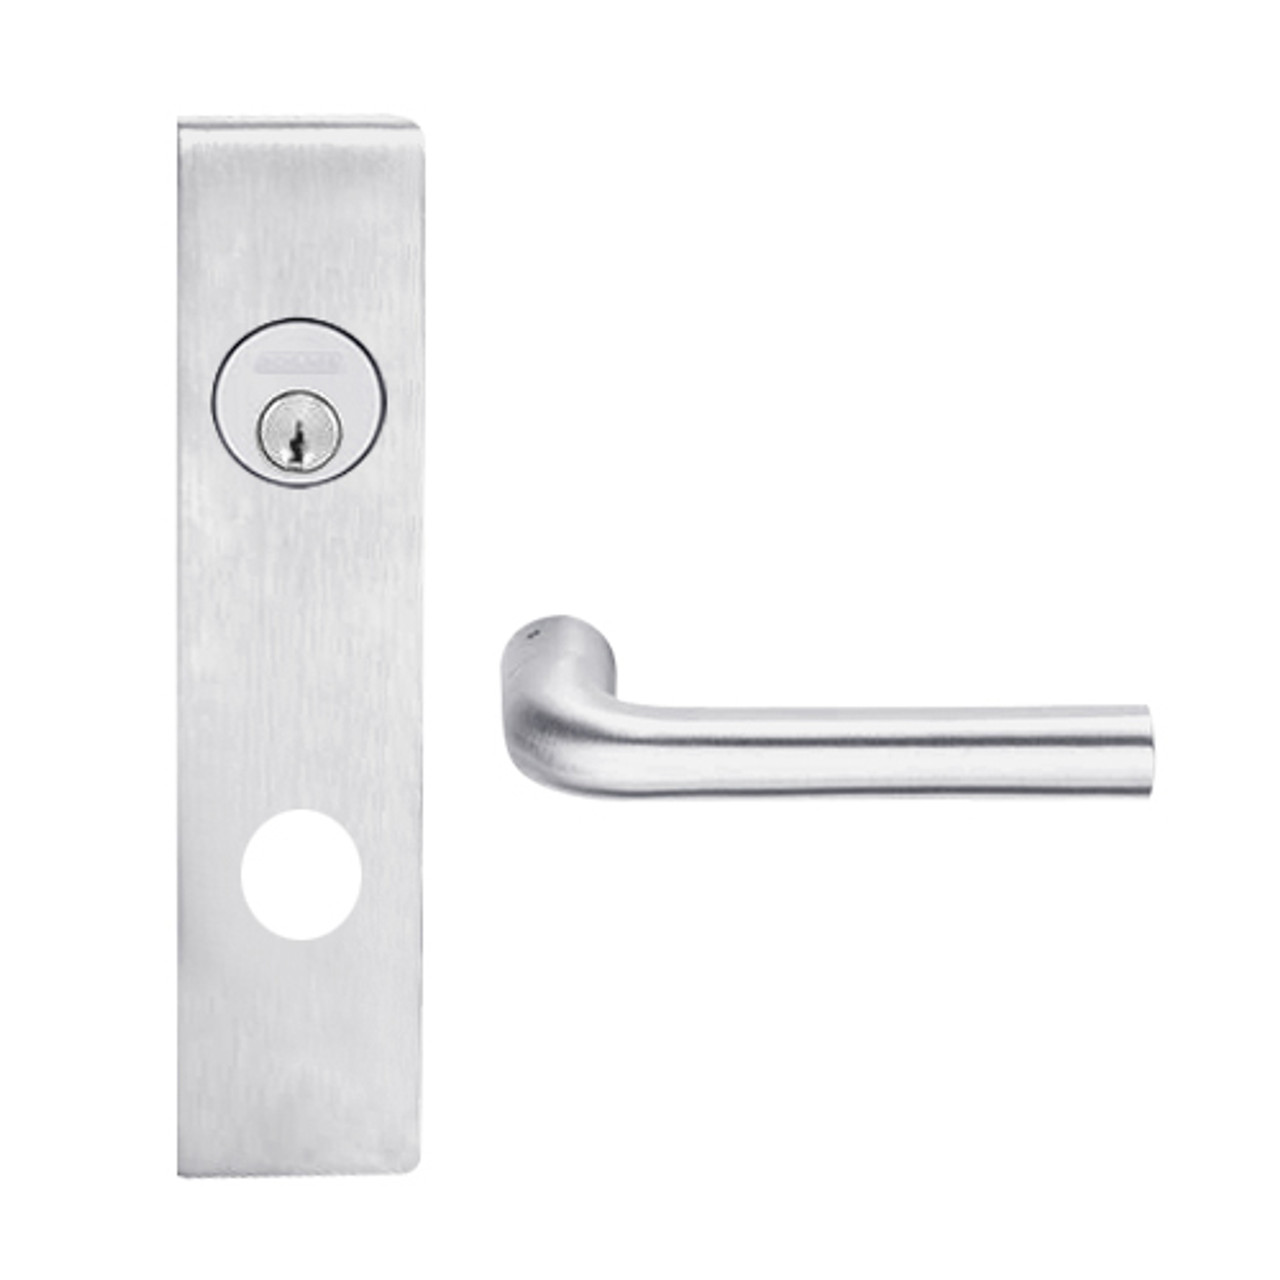 L9026L-02L-626 Schlage L Series Less Cylinder Exit Lock with Cylinder Commercial Mortise Lock with 02 Cast Lever Design in Satin Chrome